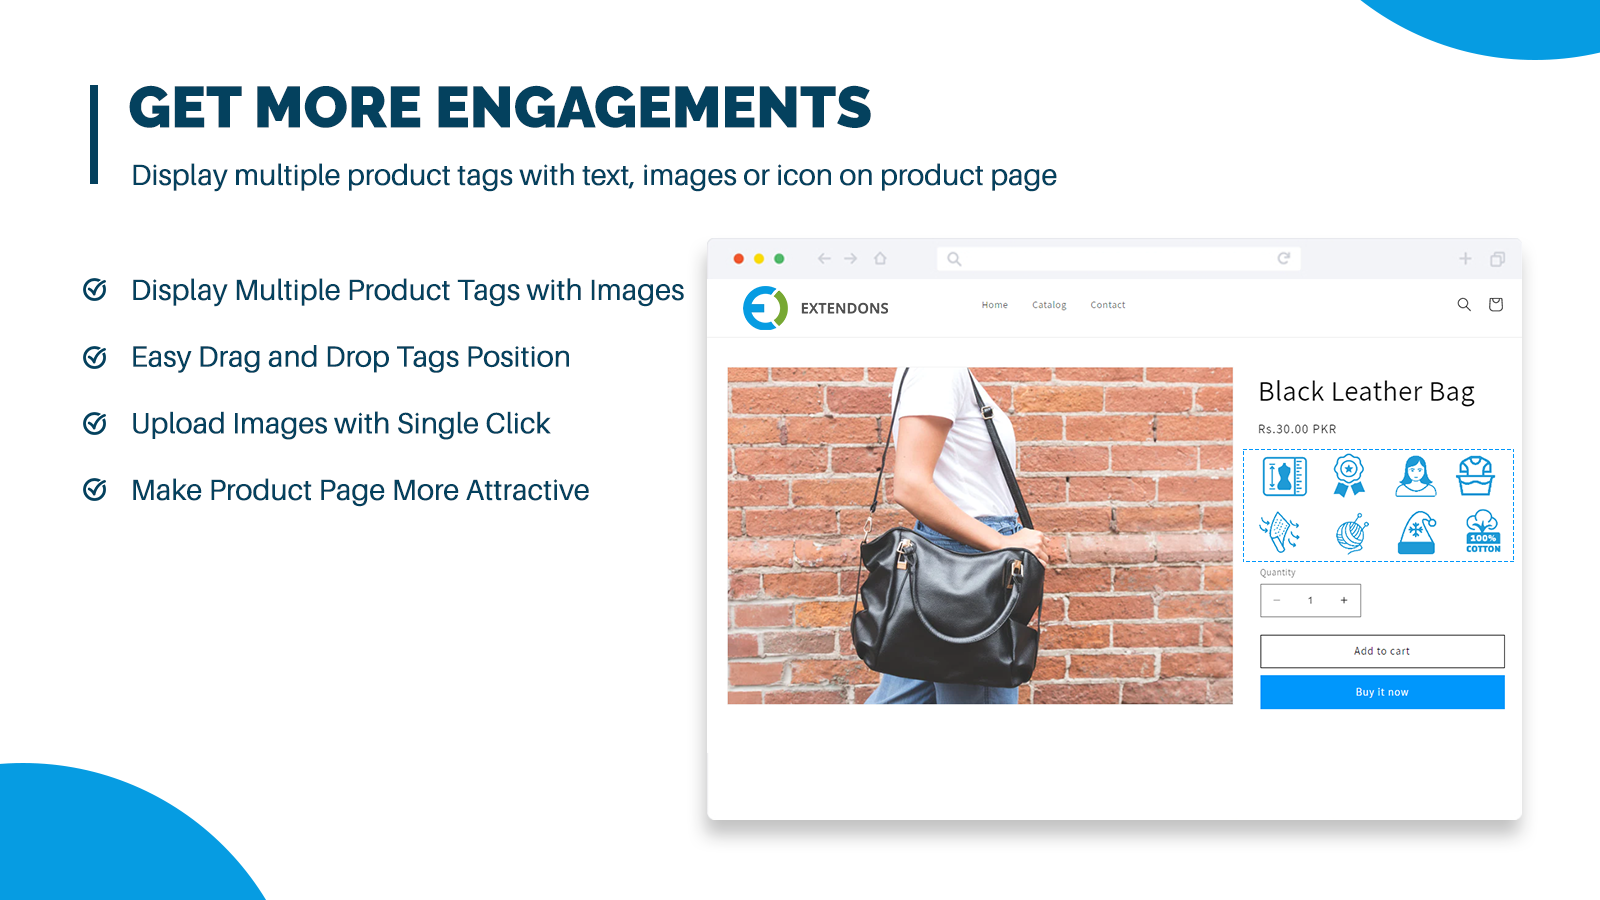 Display Product Tag with Images